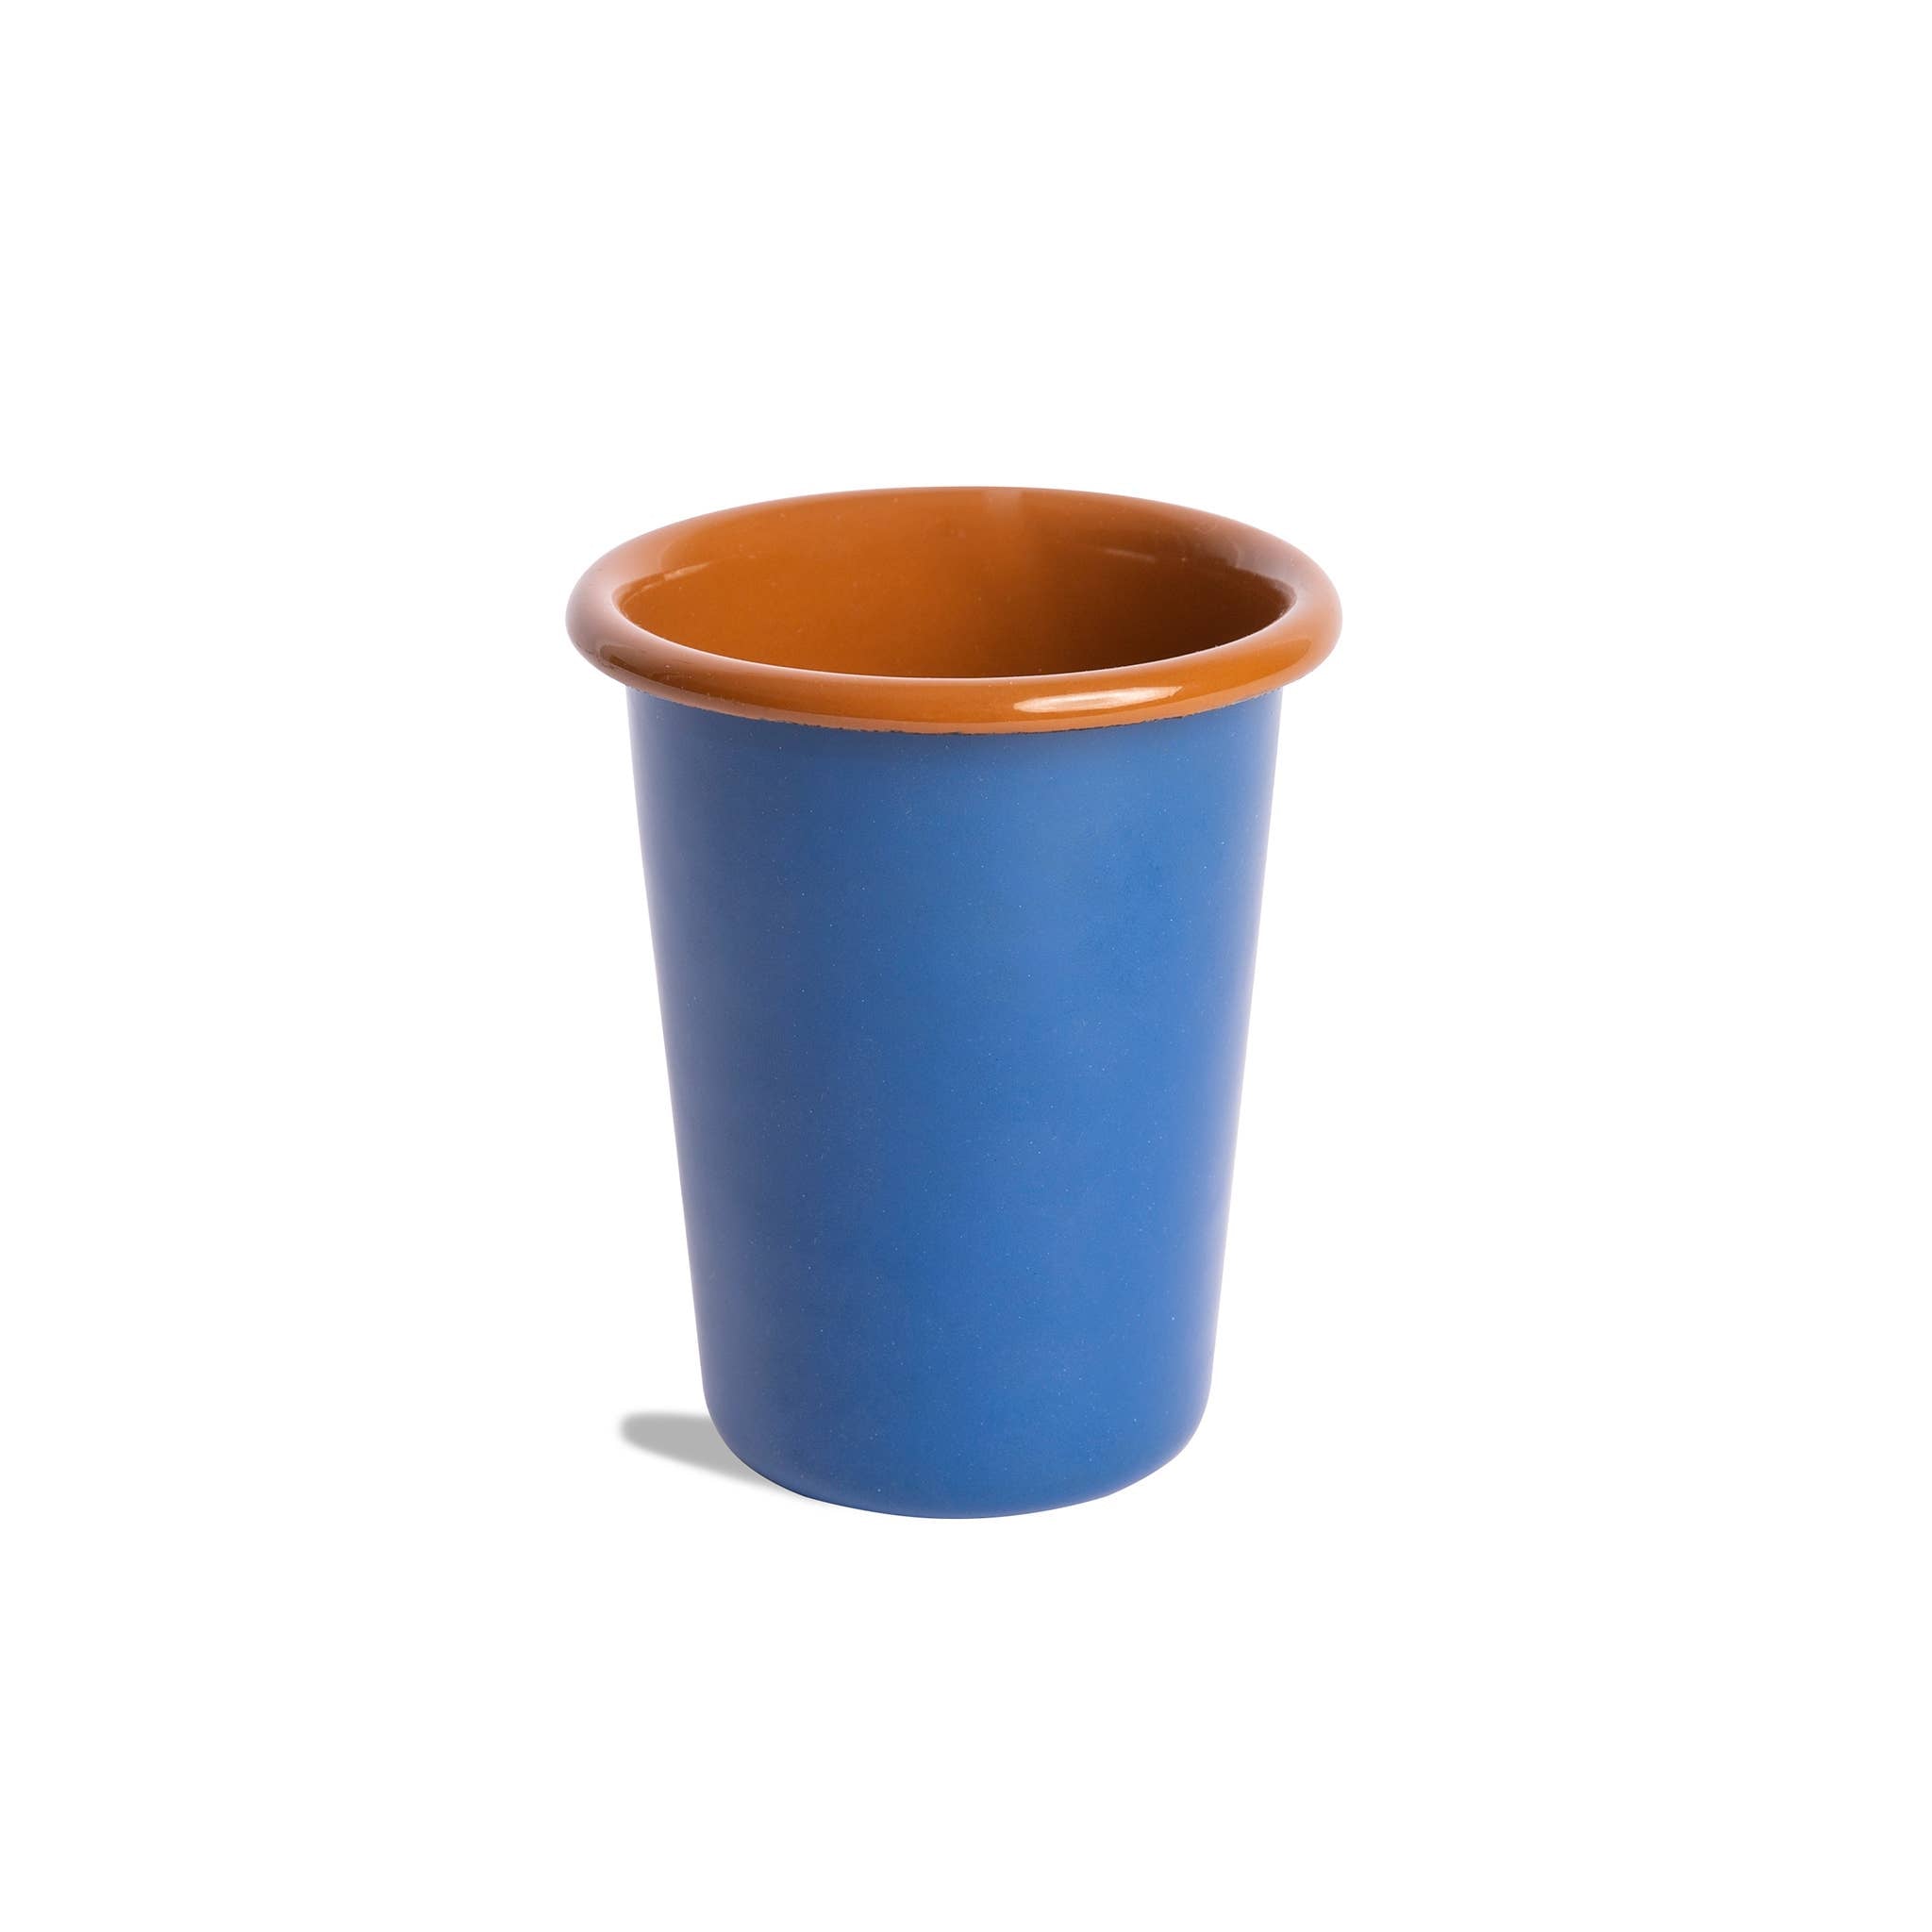 Crow Canyon Home - The Get Out x CCH Enamelware  8 oz Small Tumbler: Blue &amp; Brown